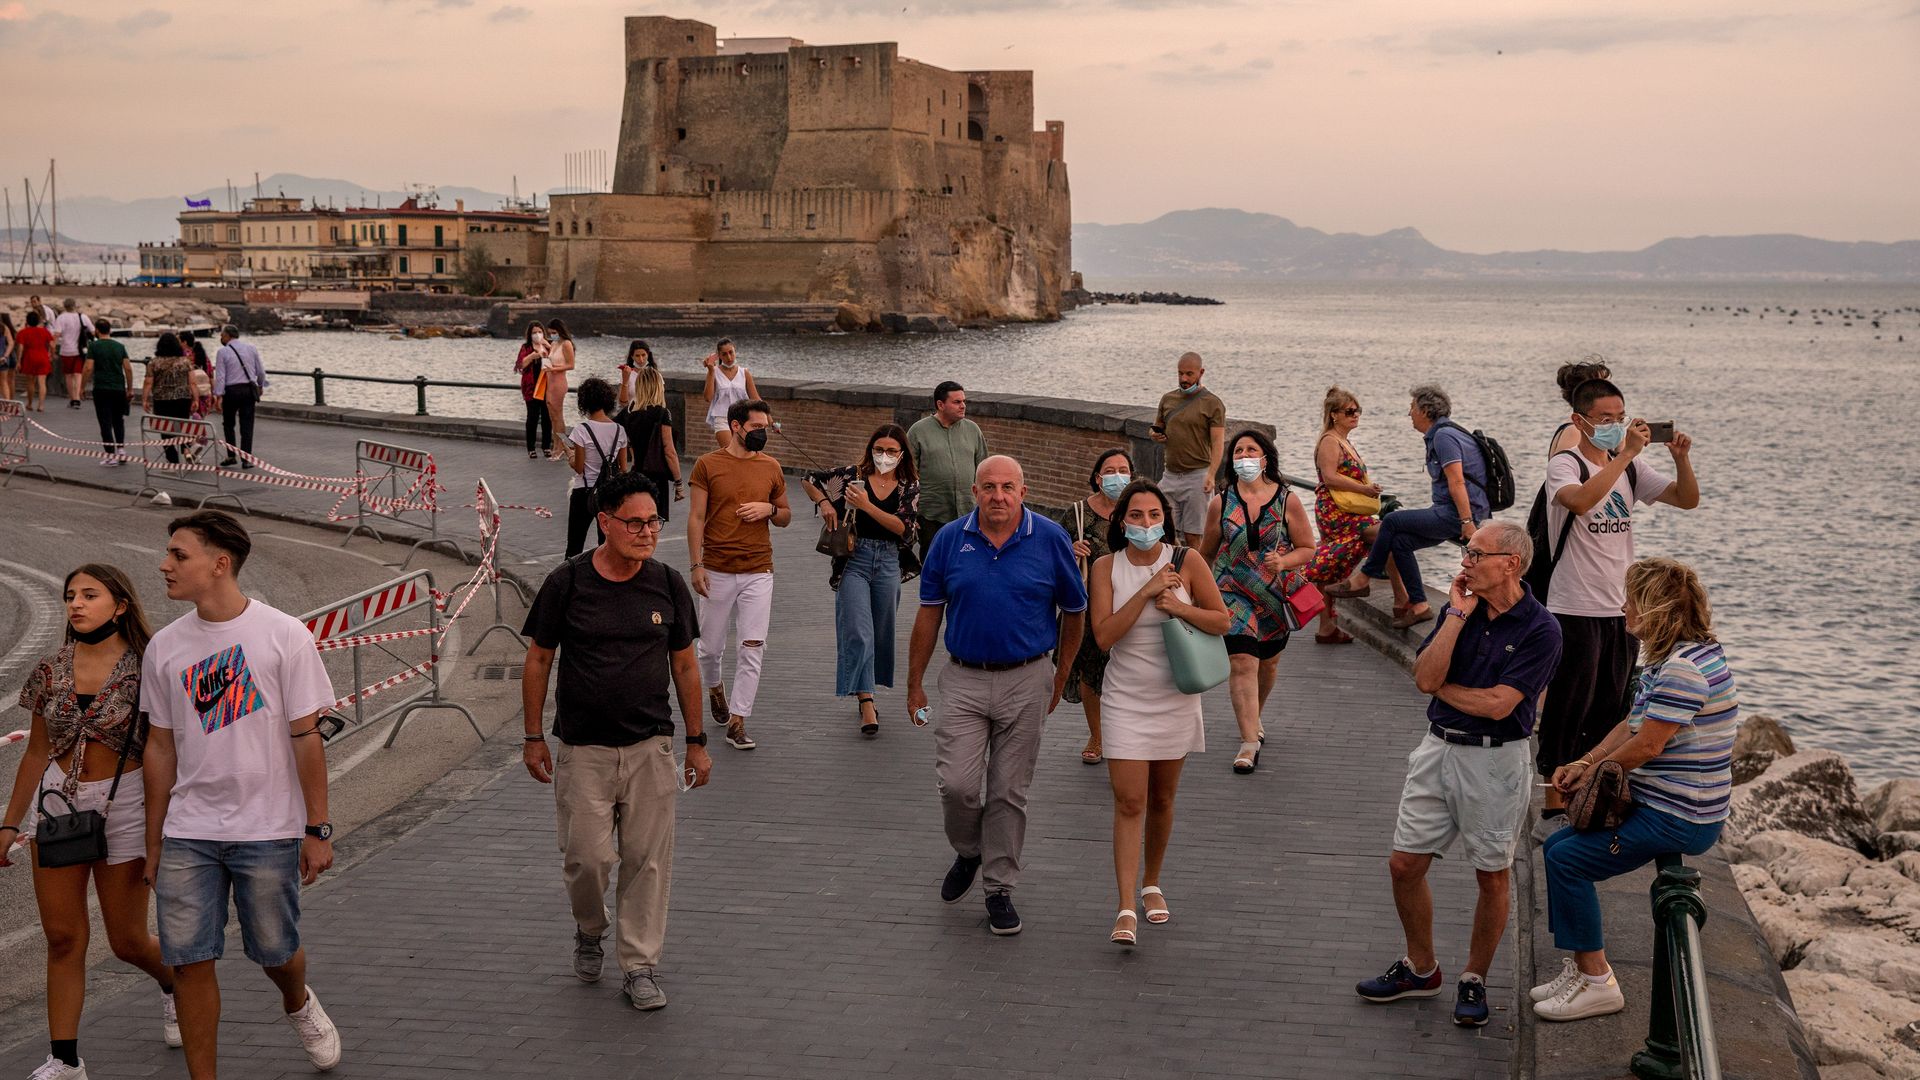 Tourists walk along the promenade near Ovo Castle, also known as Castel dell'Ovo, seaside fortification in Naples, Italy, on Wednesday, July 21, 2021.